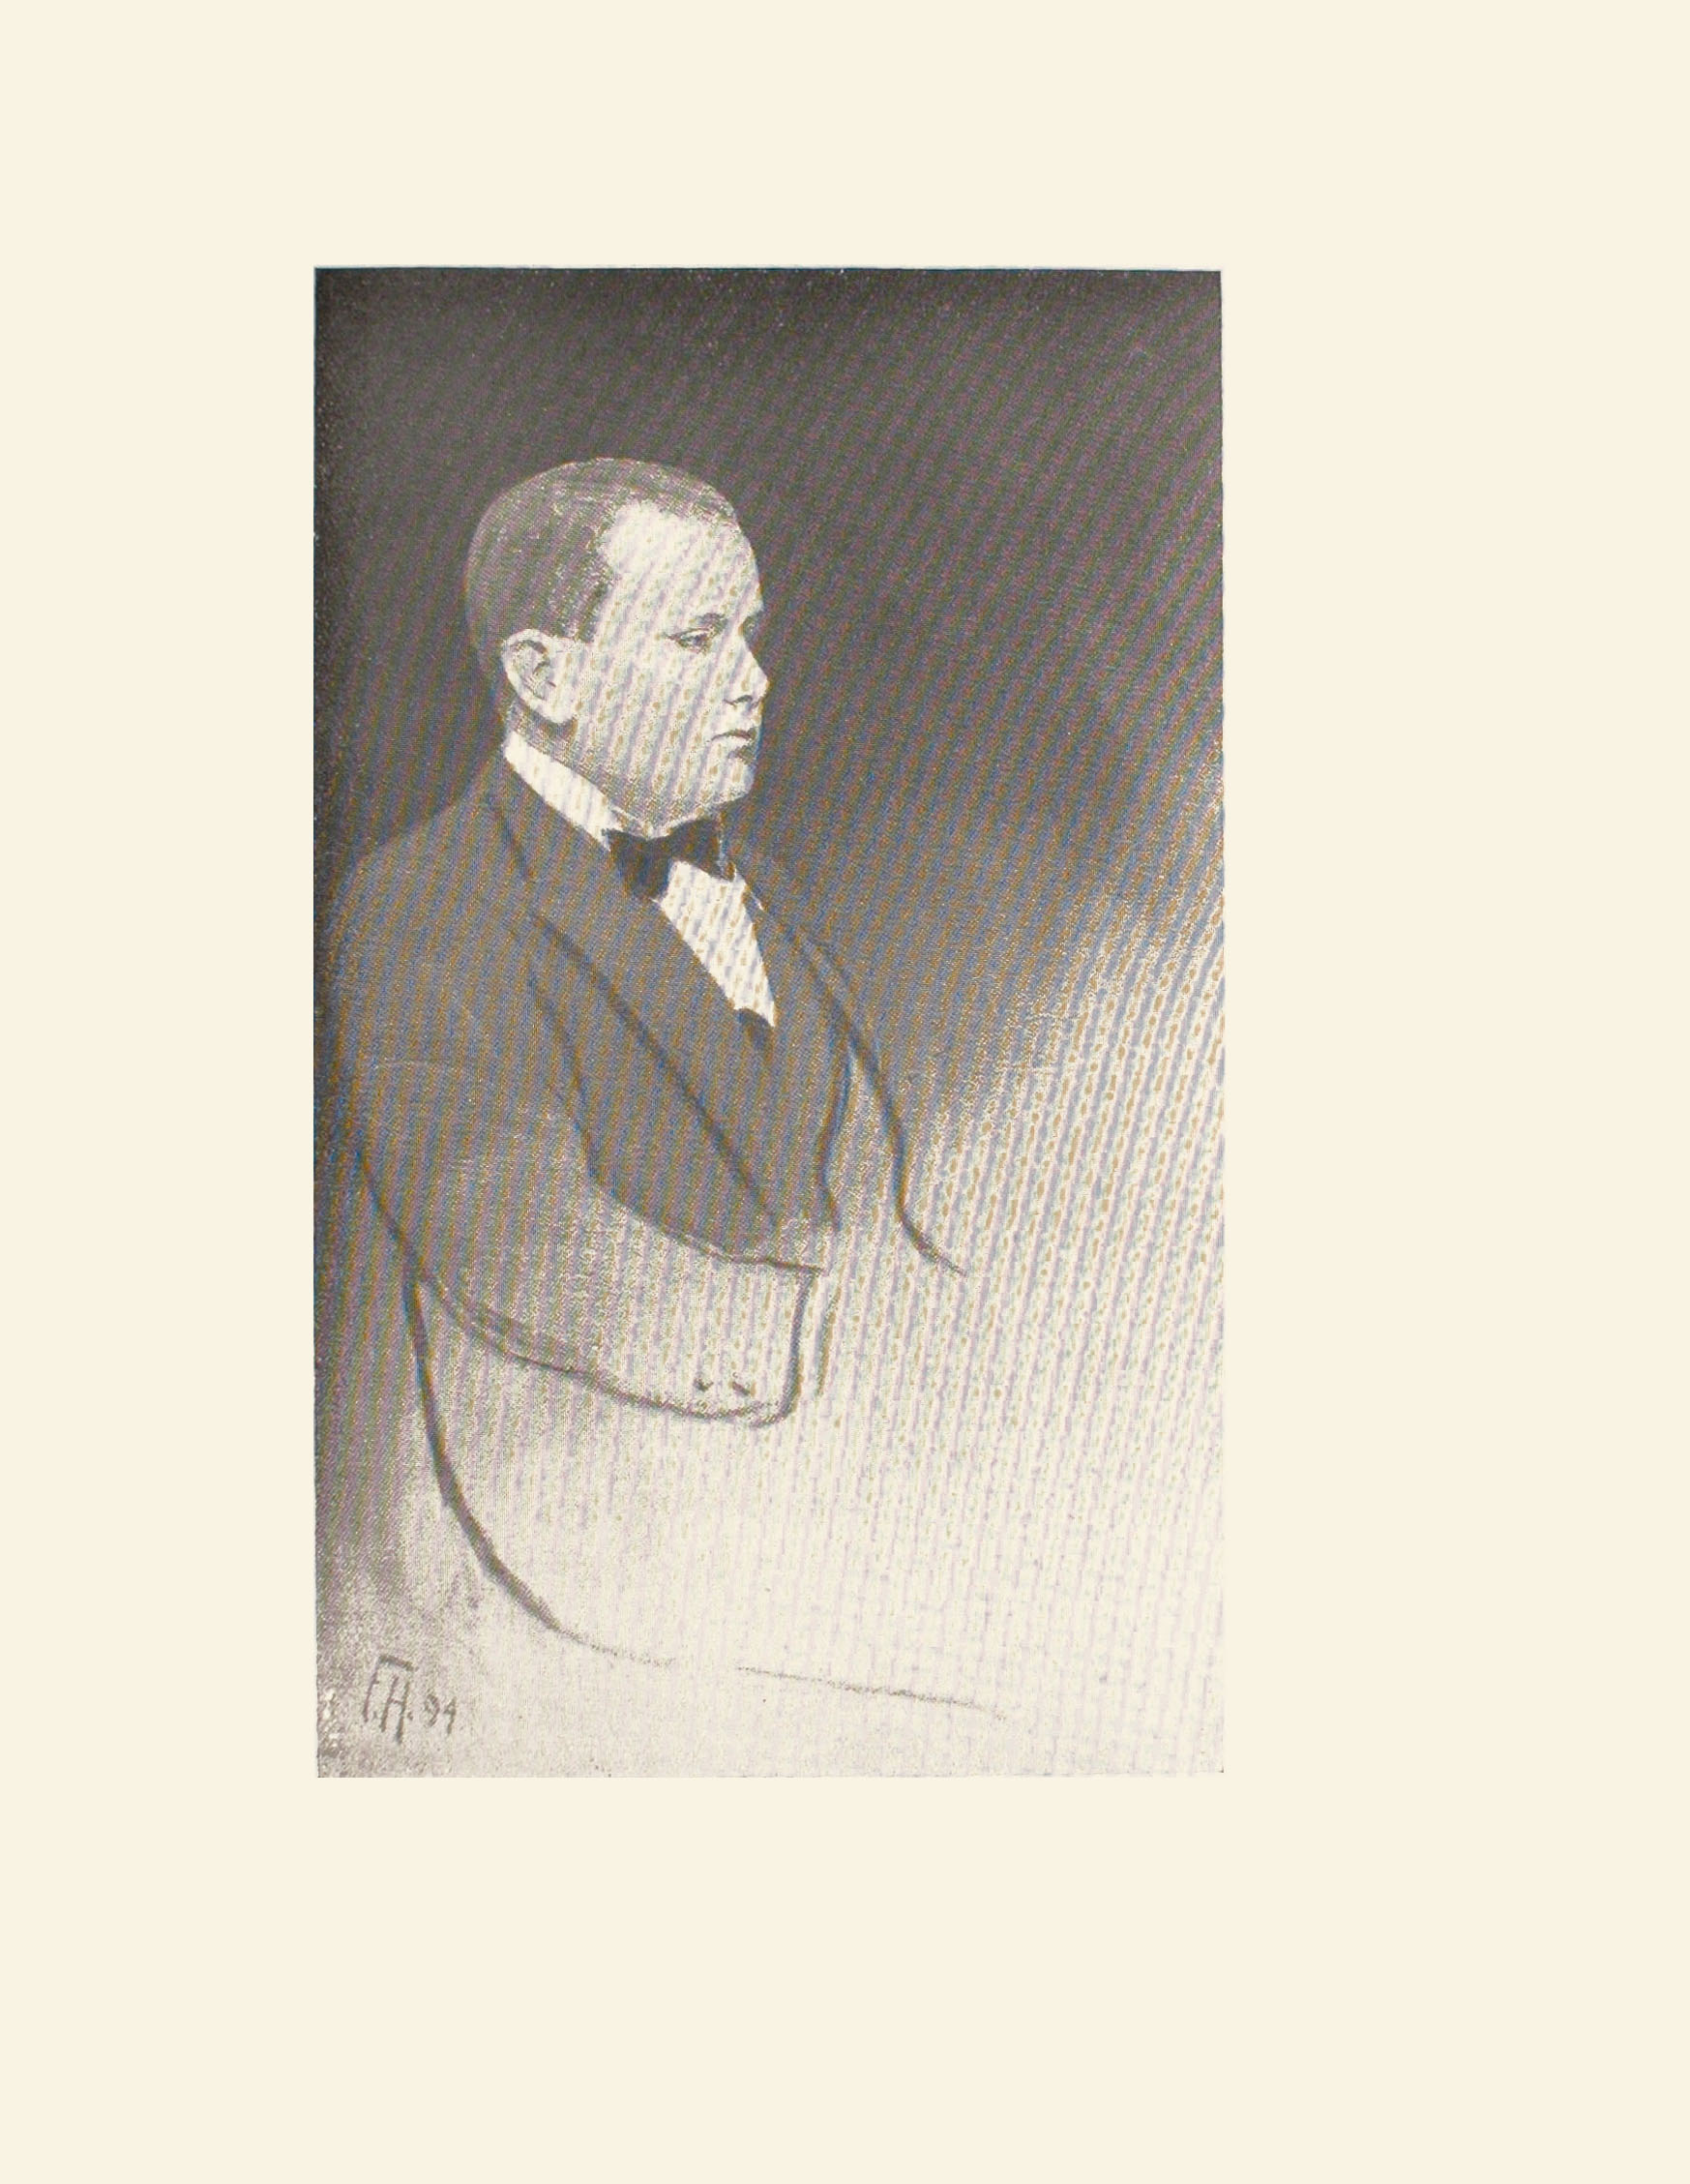 Image is of a man shown in profile He is sitting down looking right He has short light coloured hair He is wearing a suit with a dark bowtie The artist s initials and the year of the picture F H 94 are in the bottom left hand corner The background is dark and undefined The image is vertically displayed